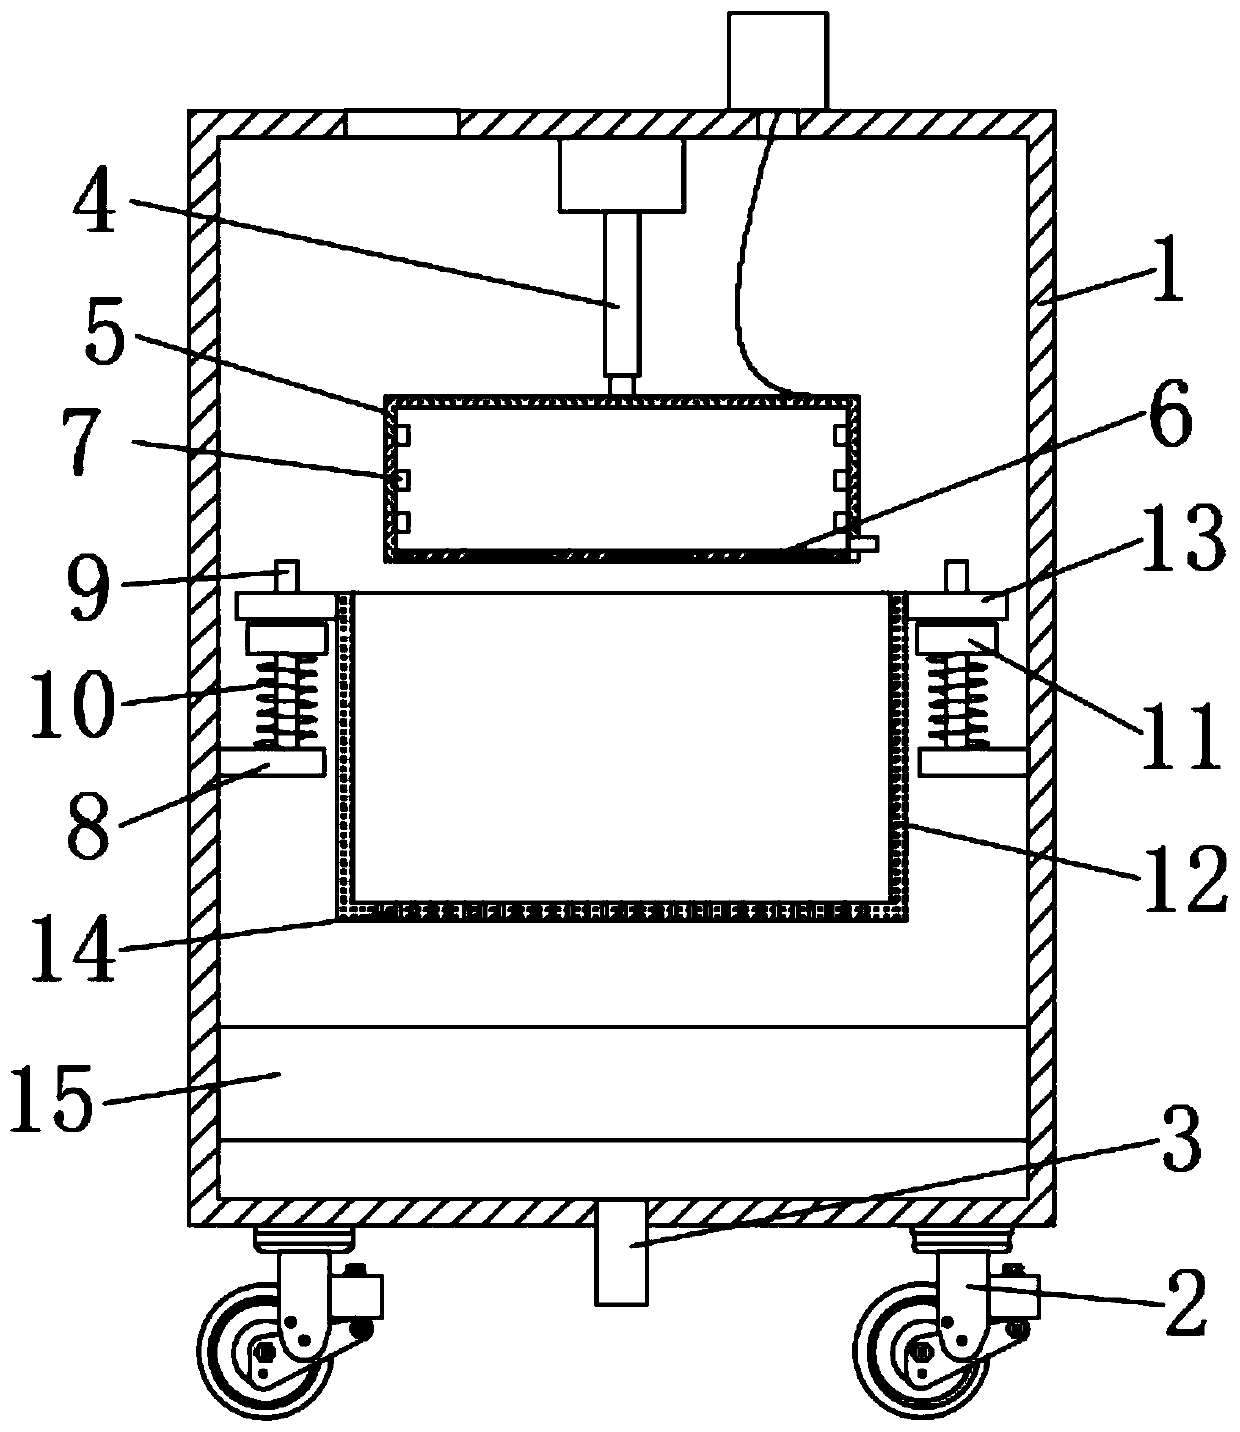 Dehydration device for food processing